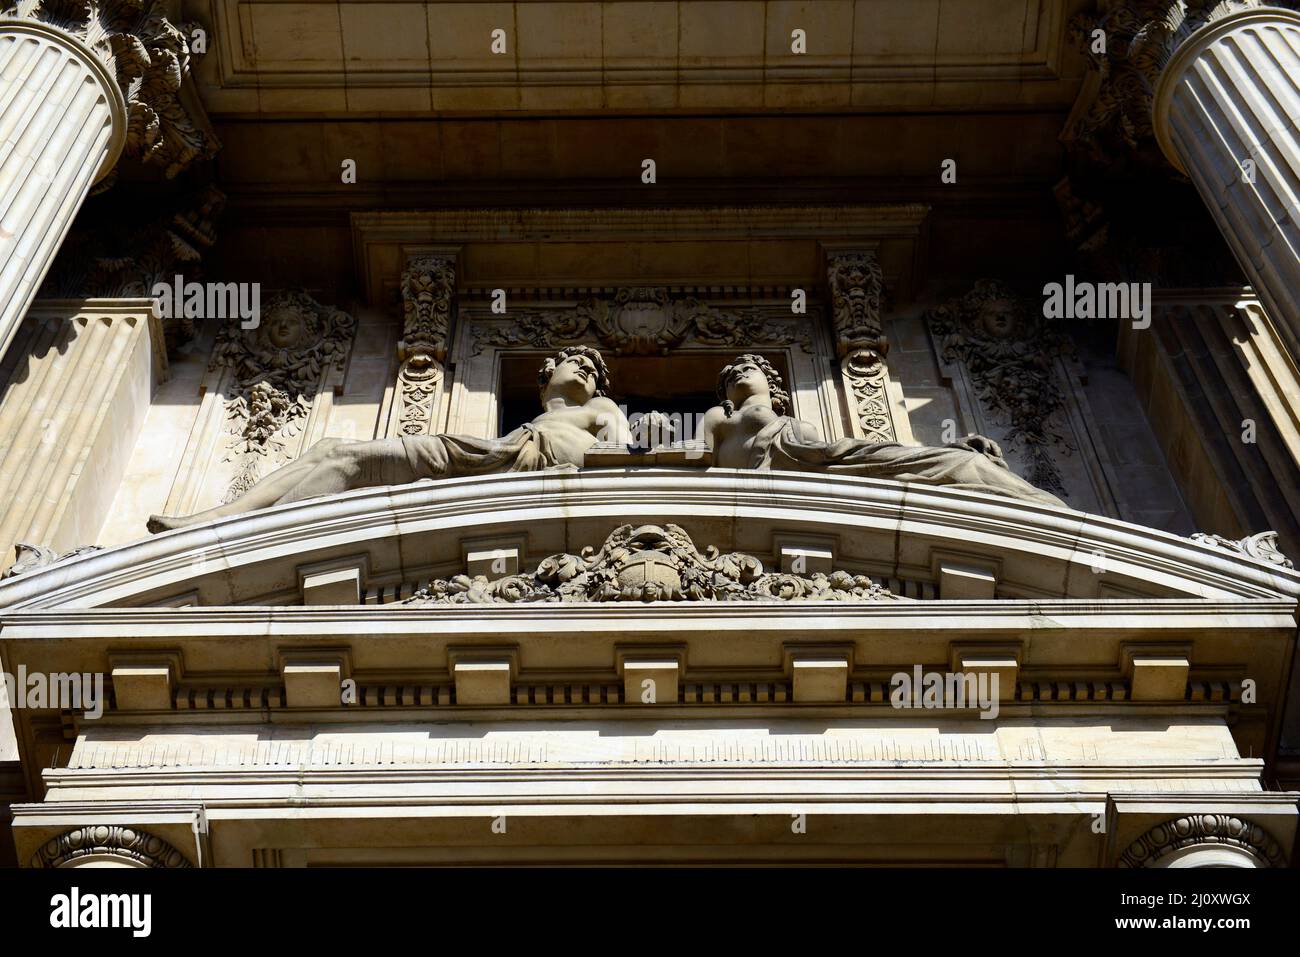 Prudence and Vigilance Sculpture on Bourse/Beurs or Brussels Stock Exchange in Belgium. Stock Photo